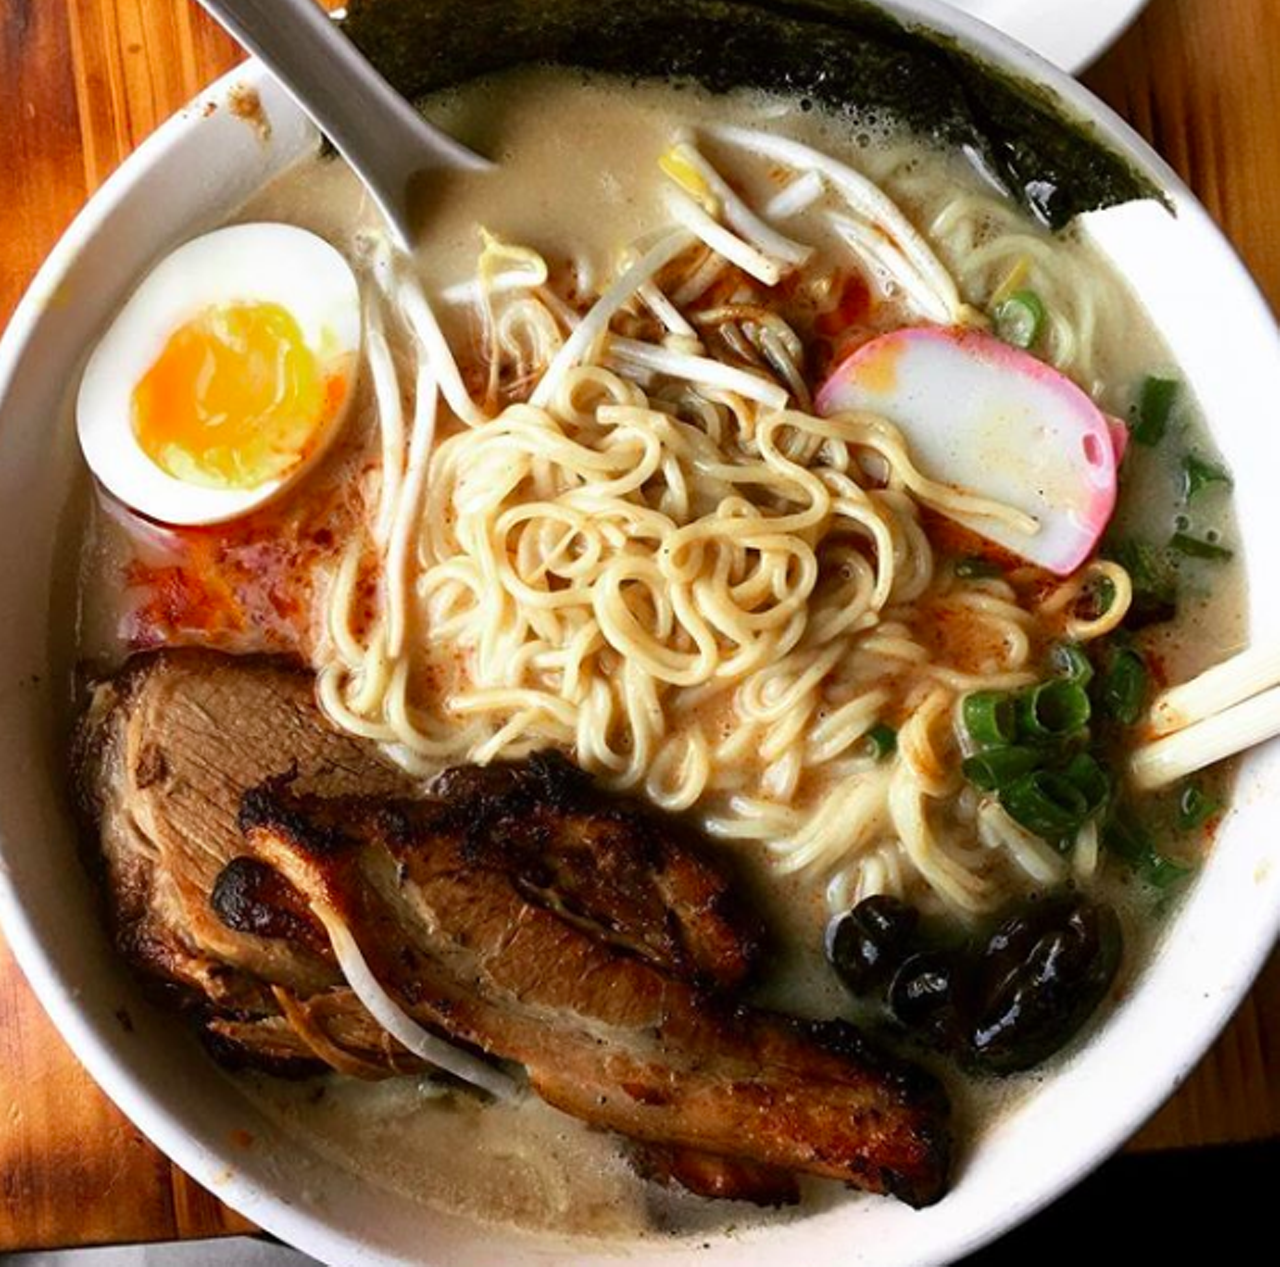 Kimura
152 E. Pecan St. #102
Sohocki will also relocate his downtown spot Kimura to the Five Points neighborhood, continuing to offer ramen and Japanese specialties. Kimura will share space with a third concept at the site, a bar and lounge in the structure's loft space, called Dash. 
Photo via Instagram / notorioushuyig